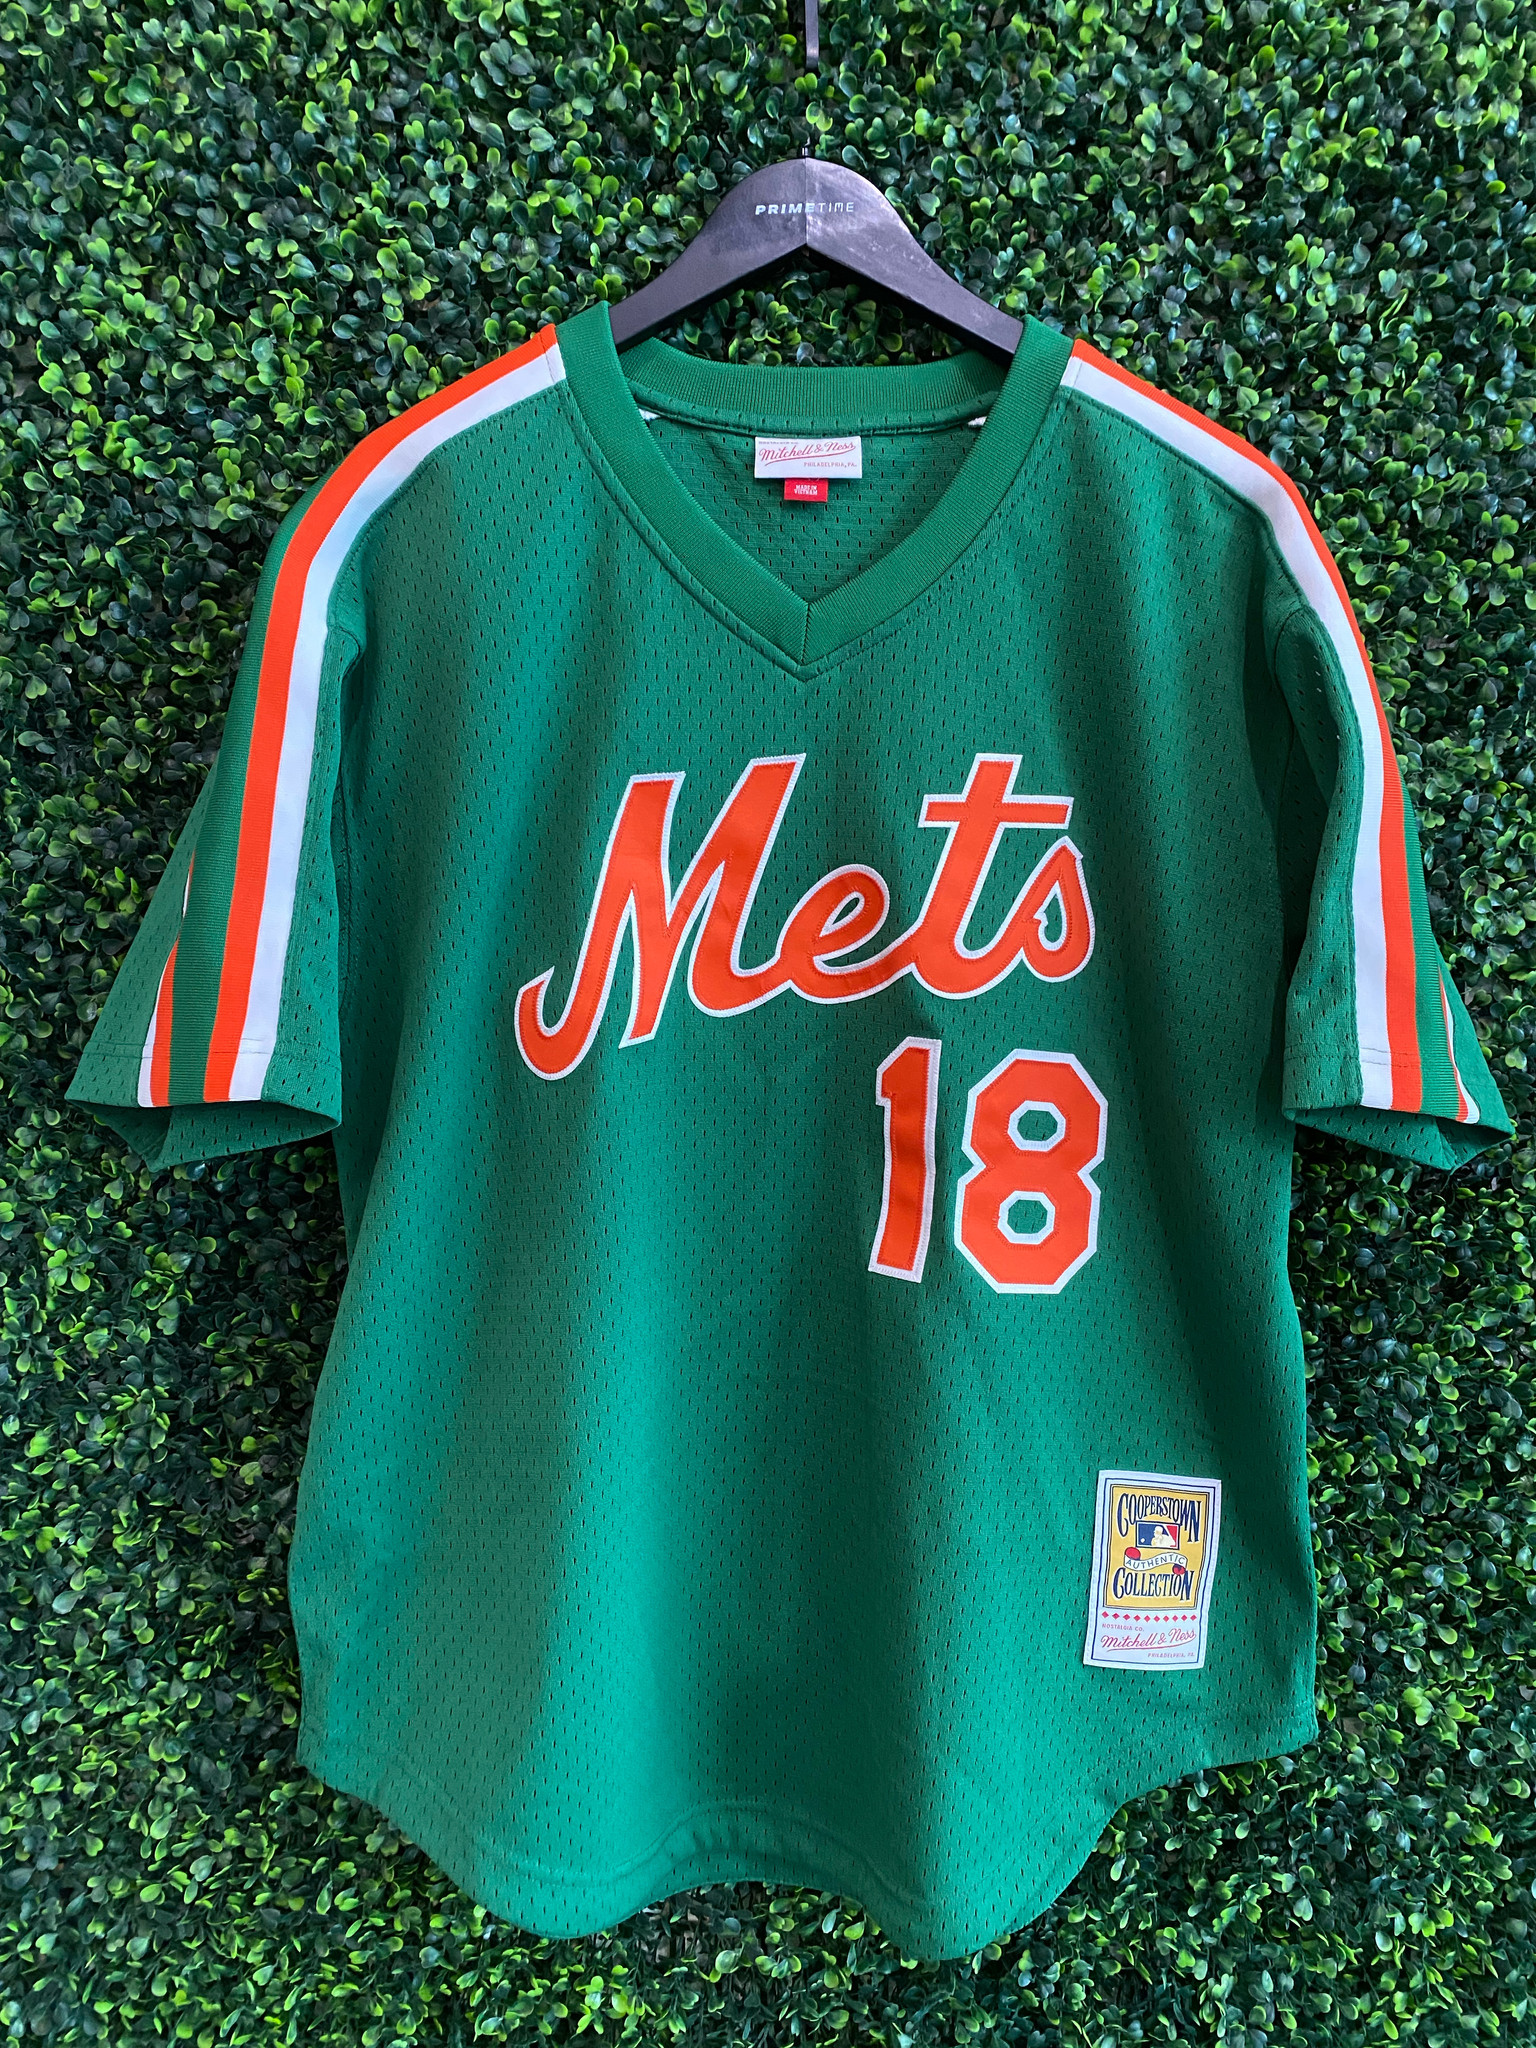 DARRYL STRAWBERRY NY METS NIKE COOPERSTOWN COLLECTION JERSEY - Primetime